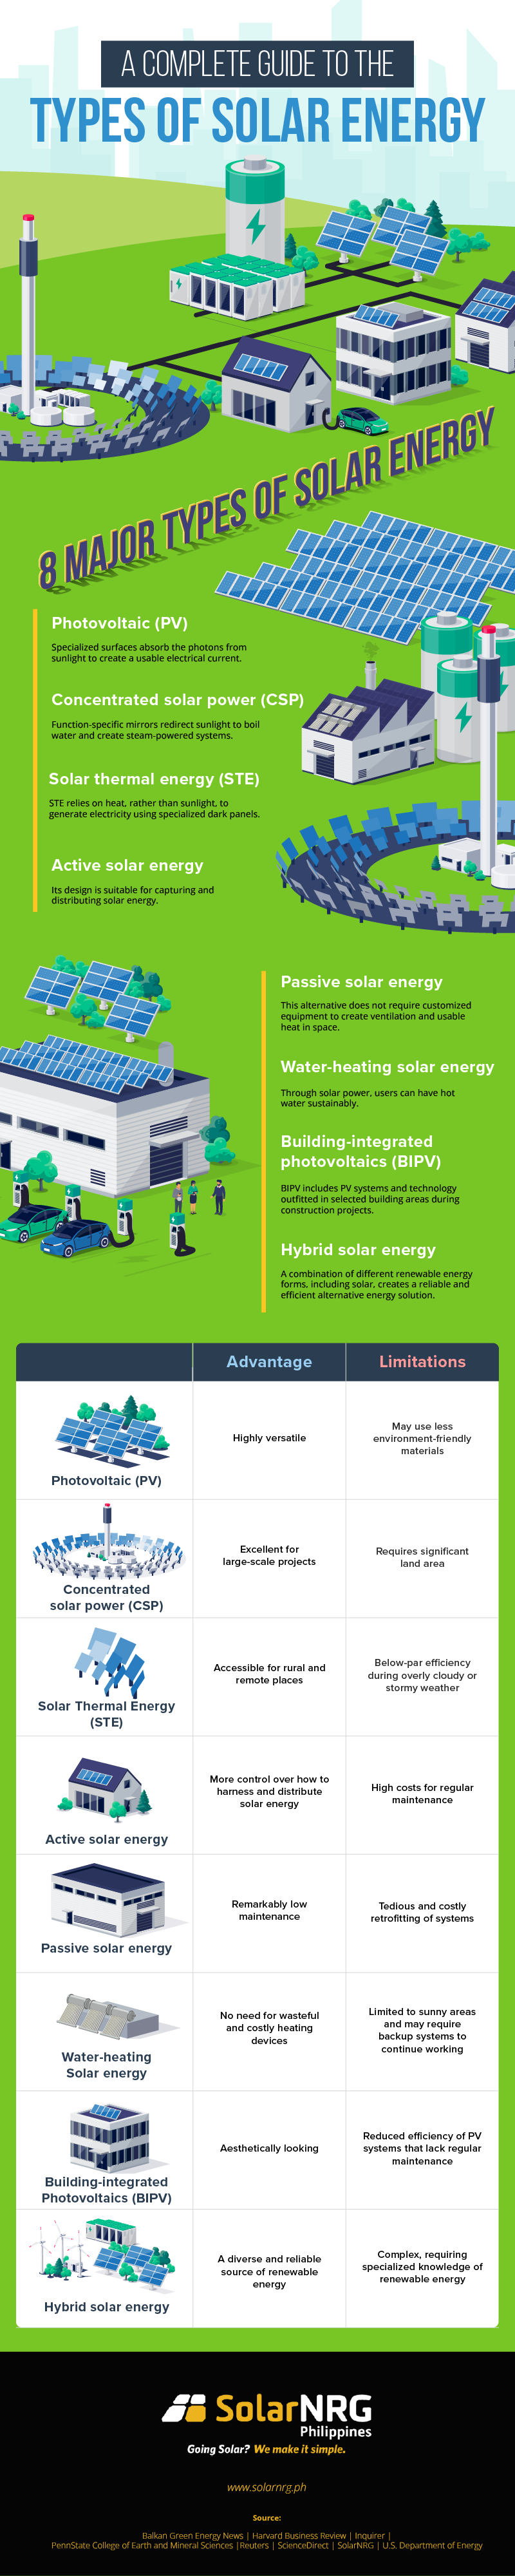 An infographic depicting the Types of Solar Energy.